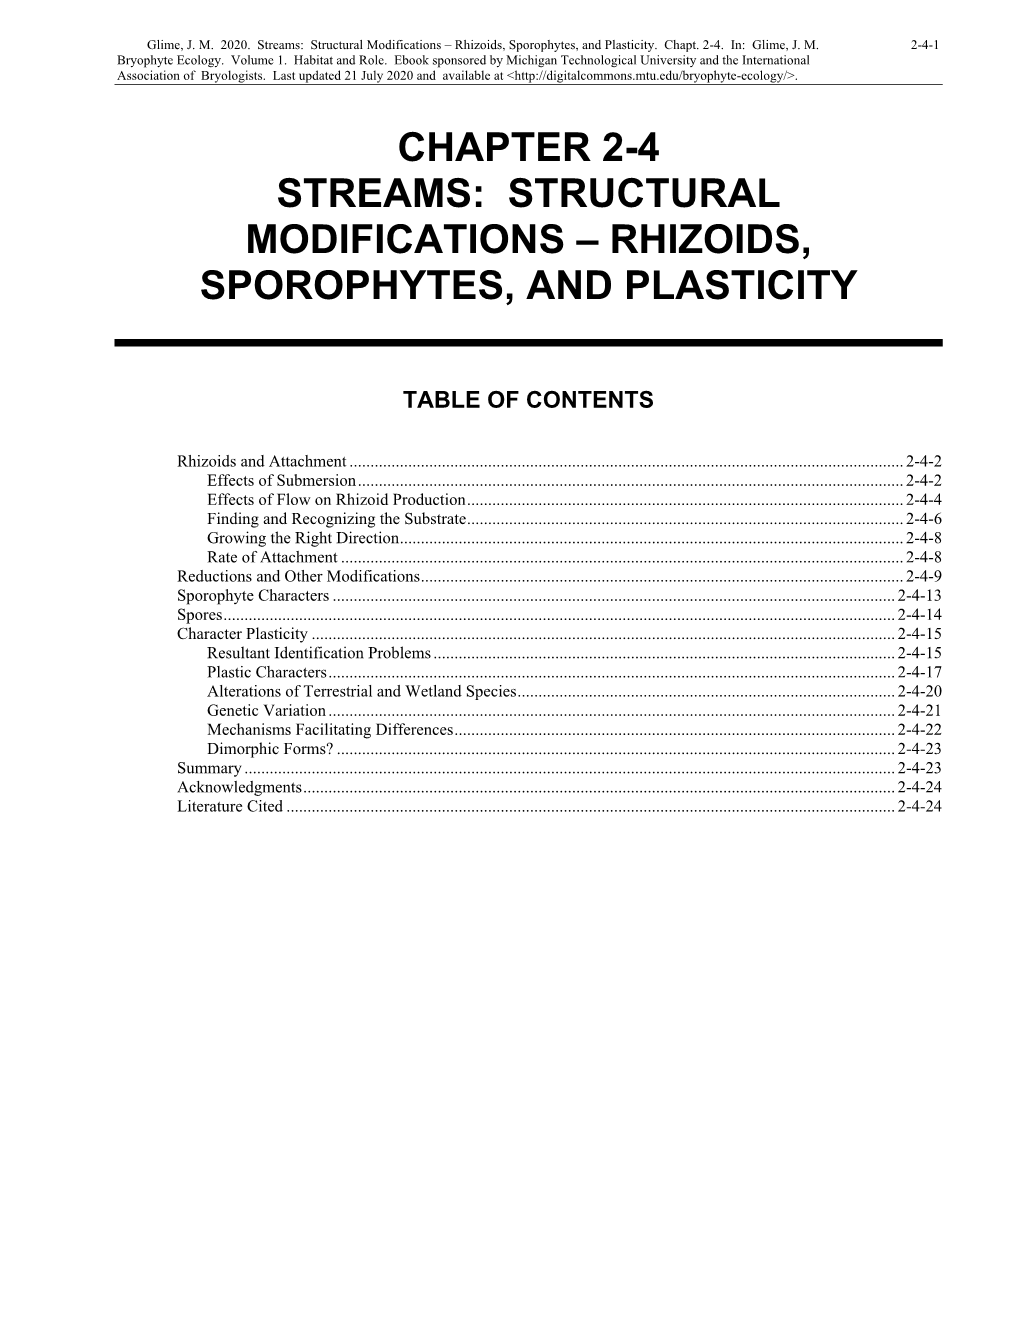 Volume 4, Chapter 2-4: Streams: Structural Modifications